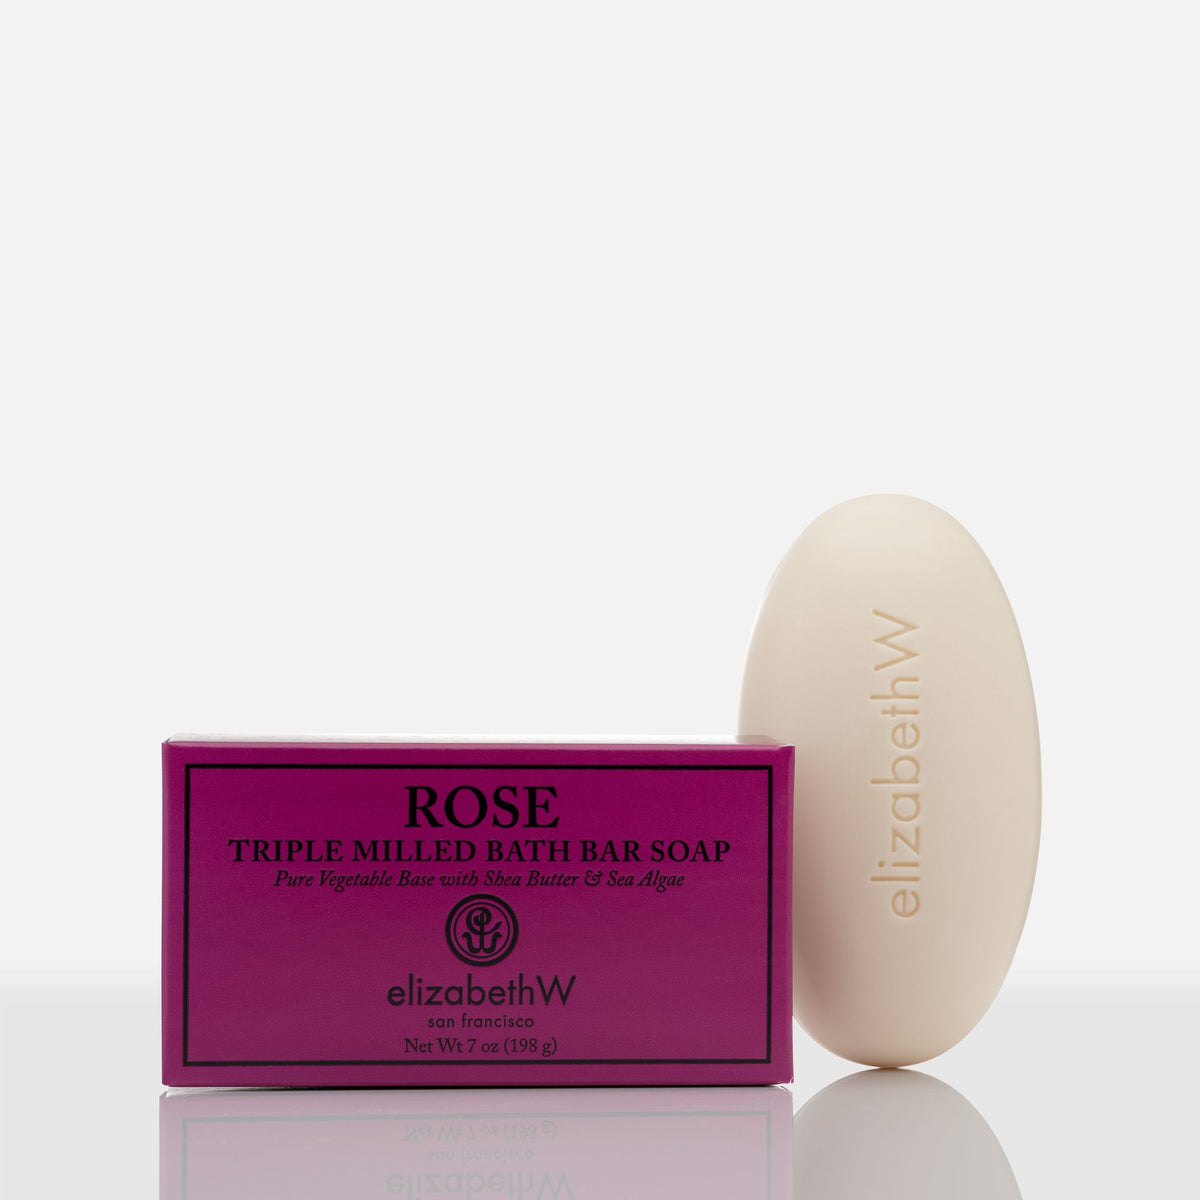 A bar of Elizabeth W Signature Rose Soap - 7oz next to its vibrant pink packaging labeled "rose" from elizabeth W, on a reflective white surface.